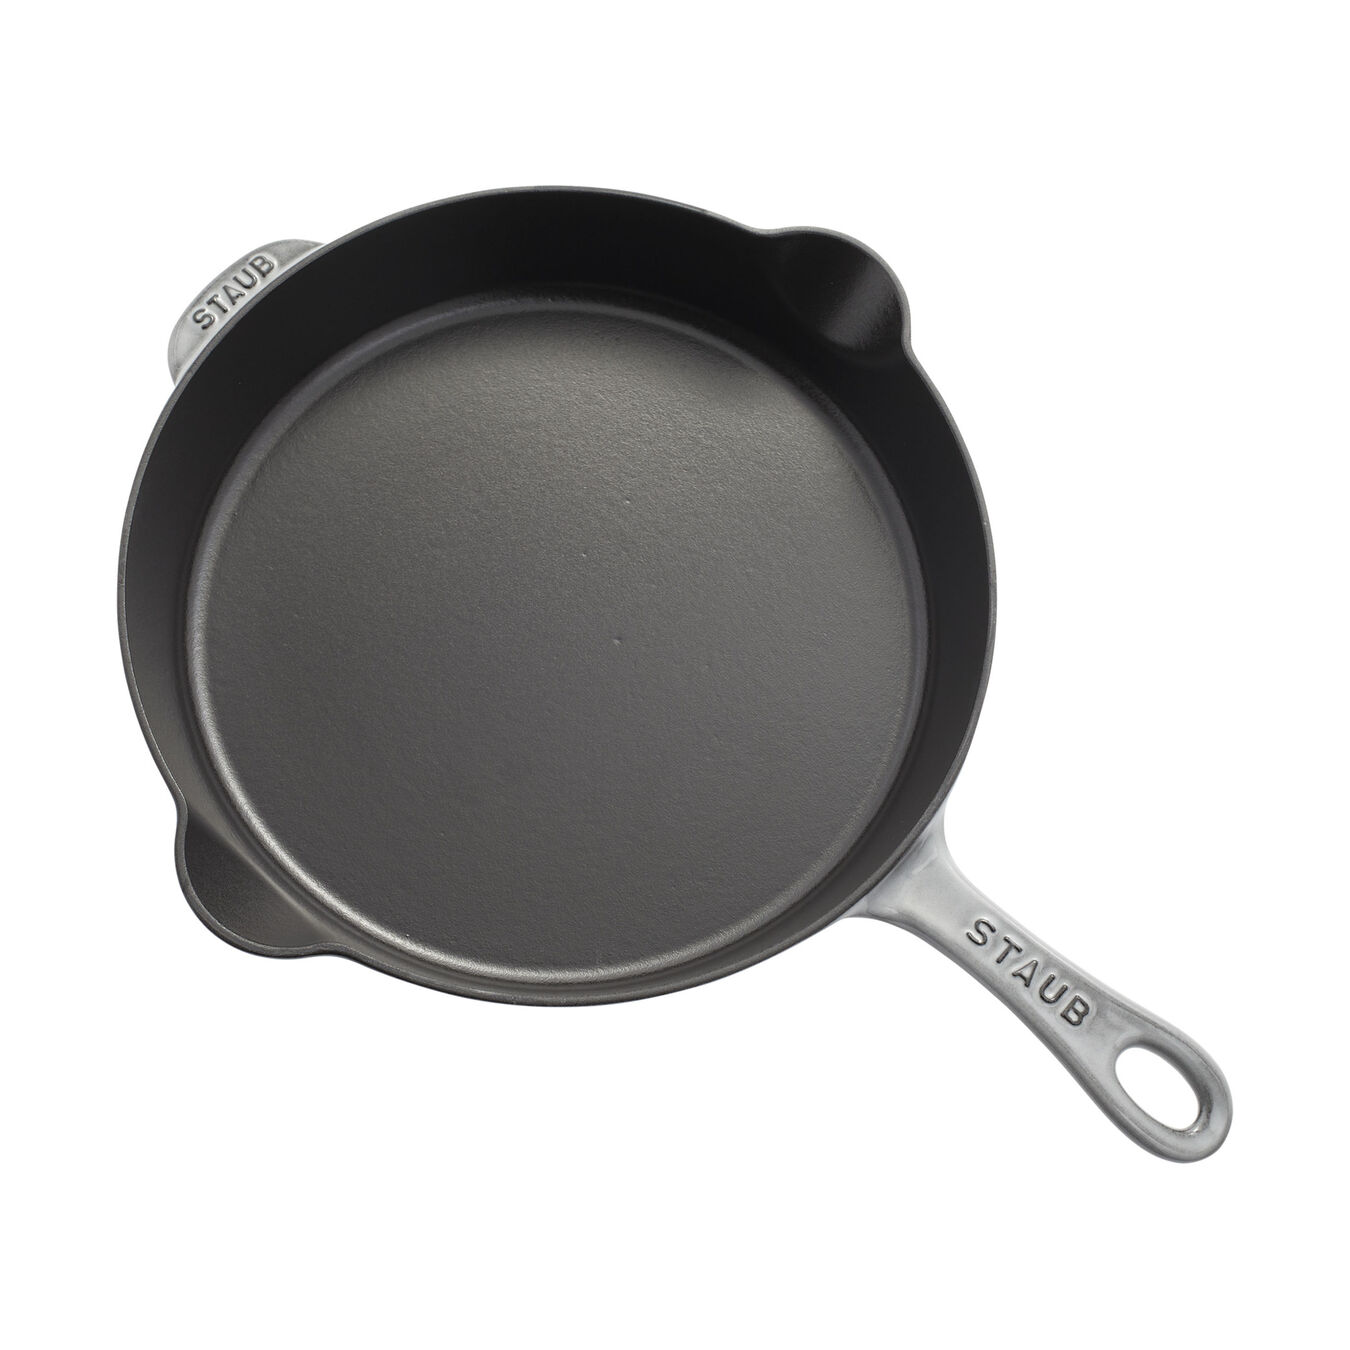 11-inch, Traditional Deep Skillet, graphite grey,,large 3